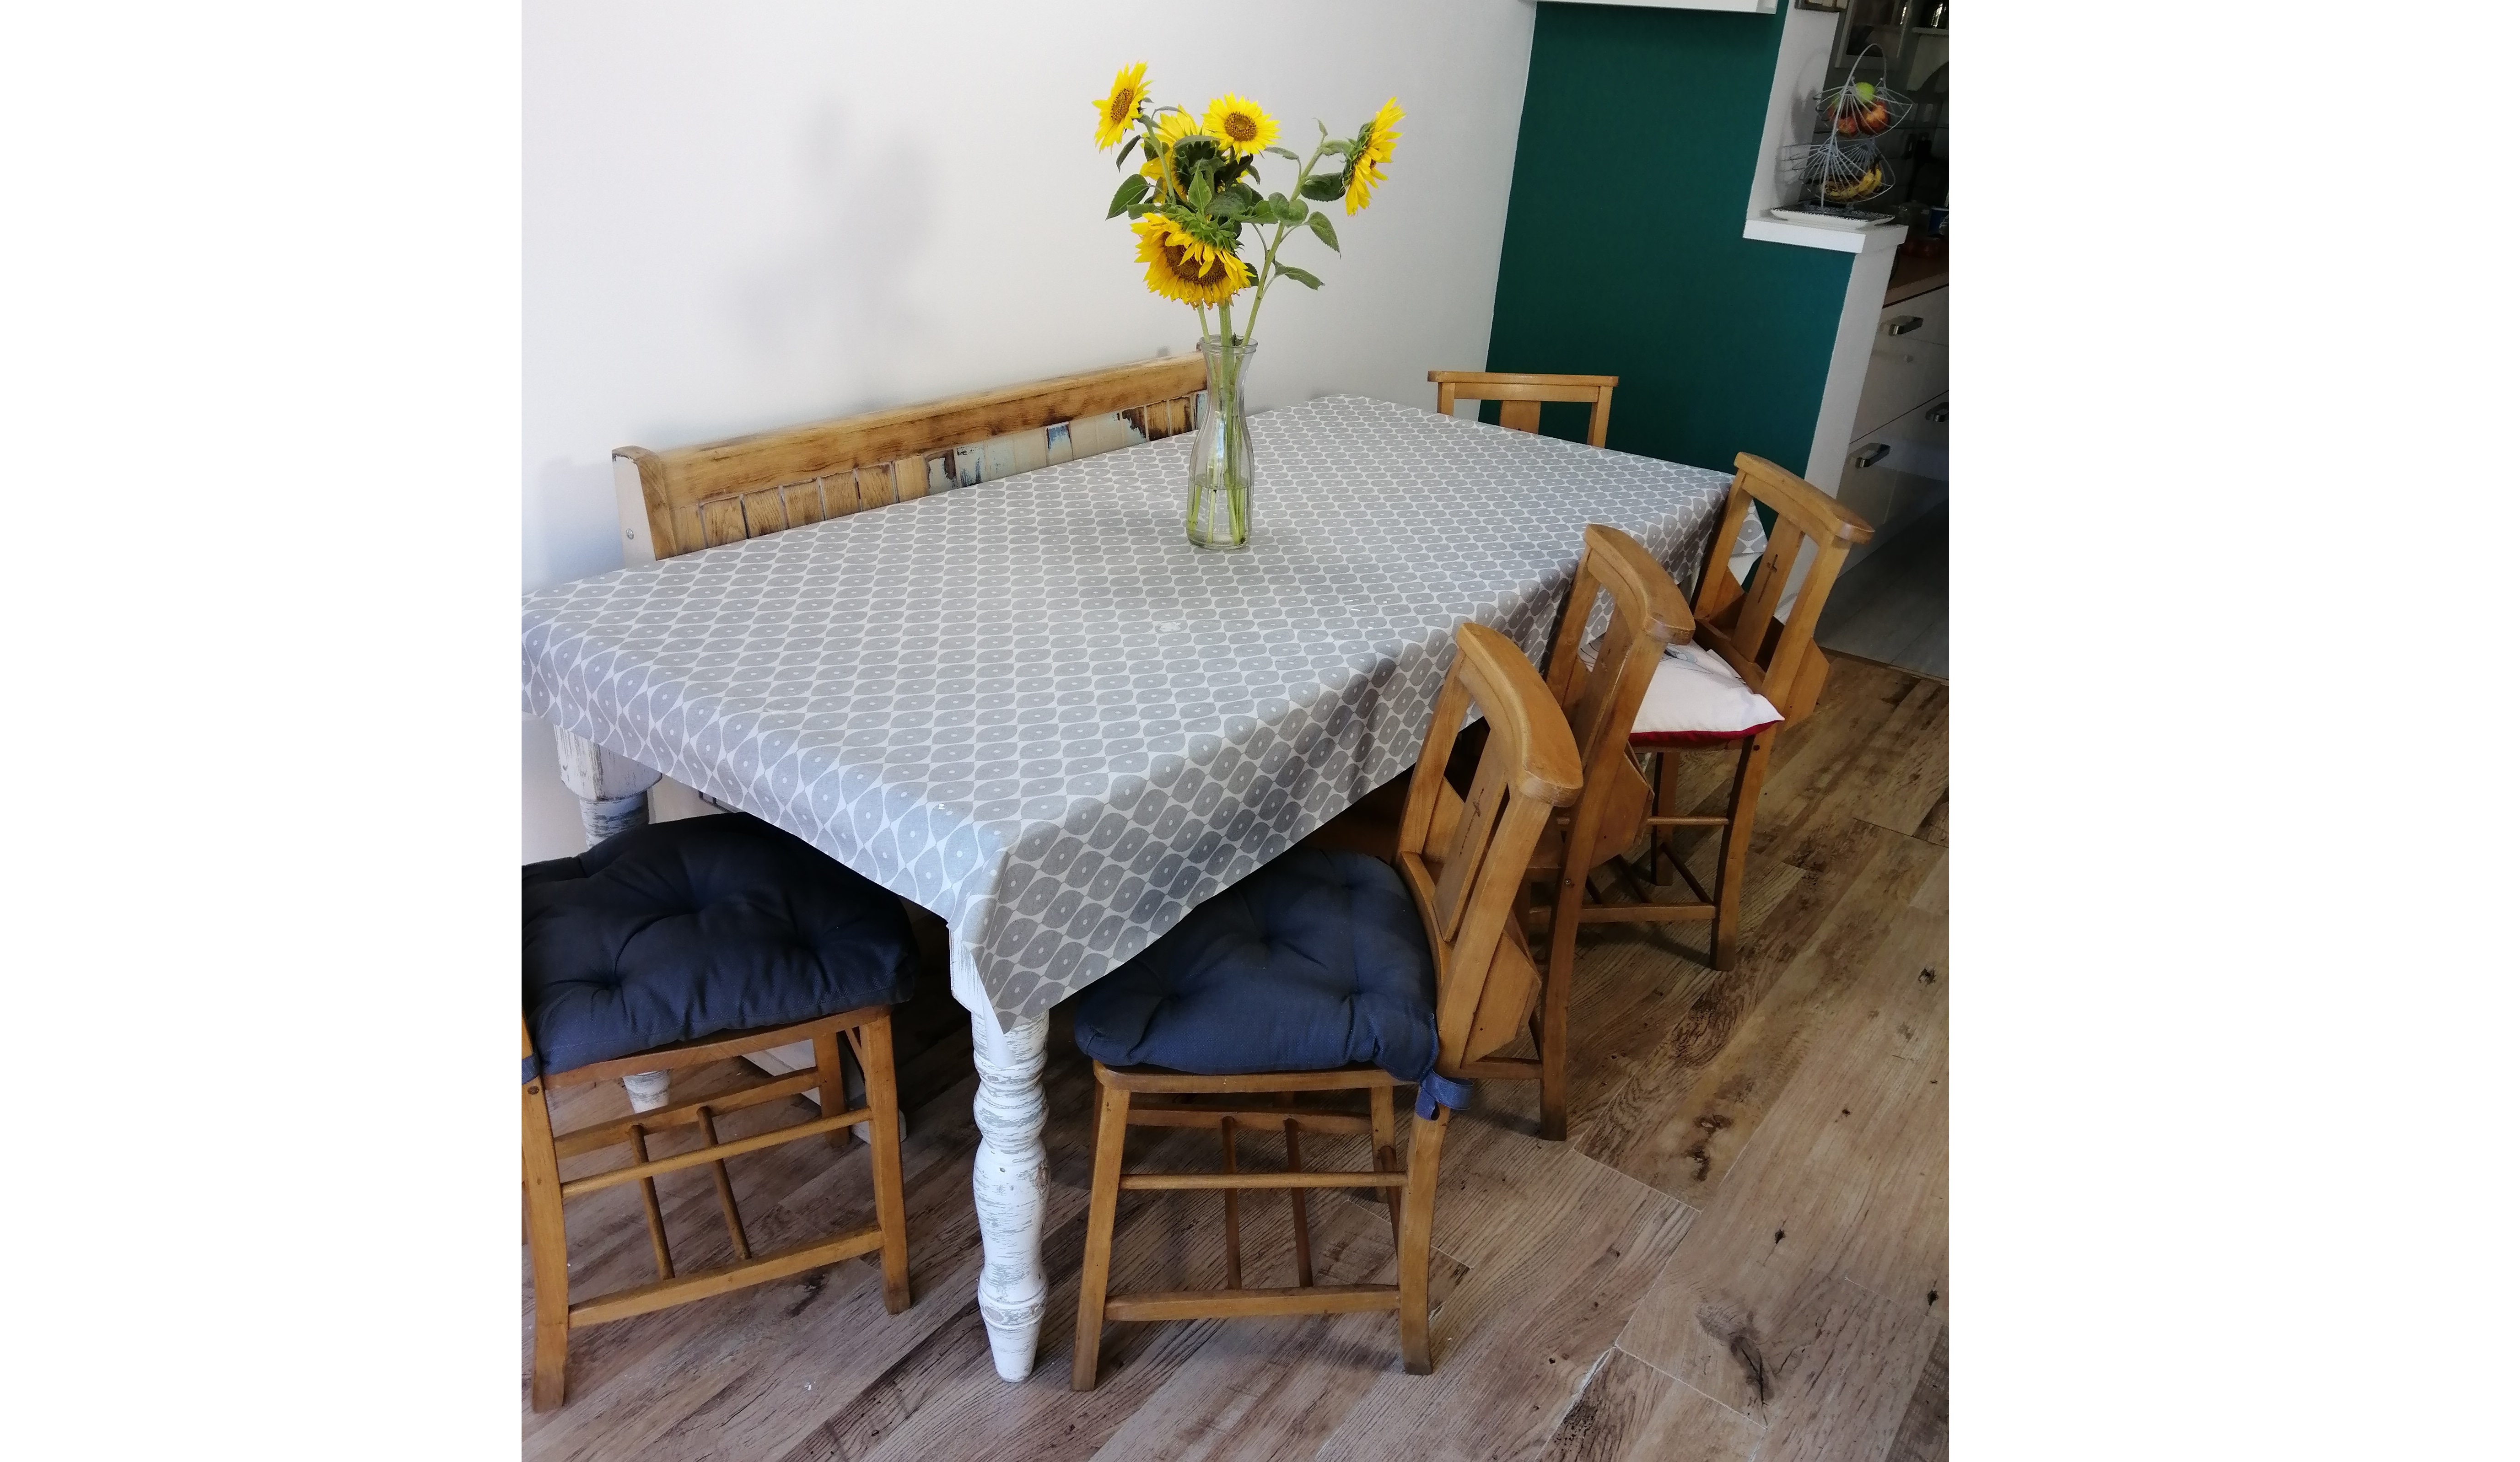 Antique Church Chairs Used With a Kitchen Table